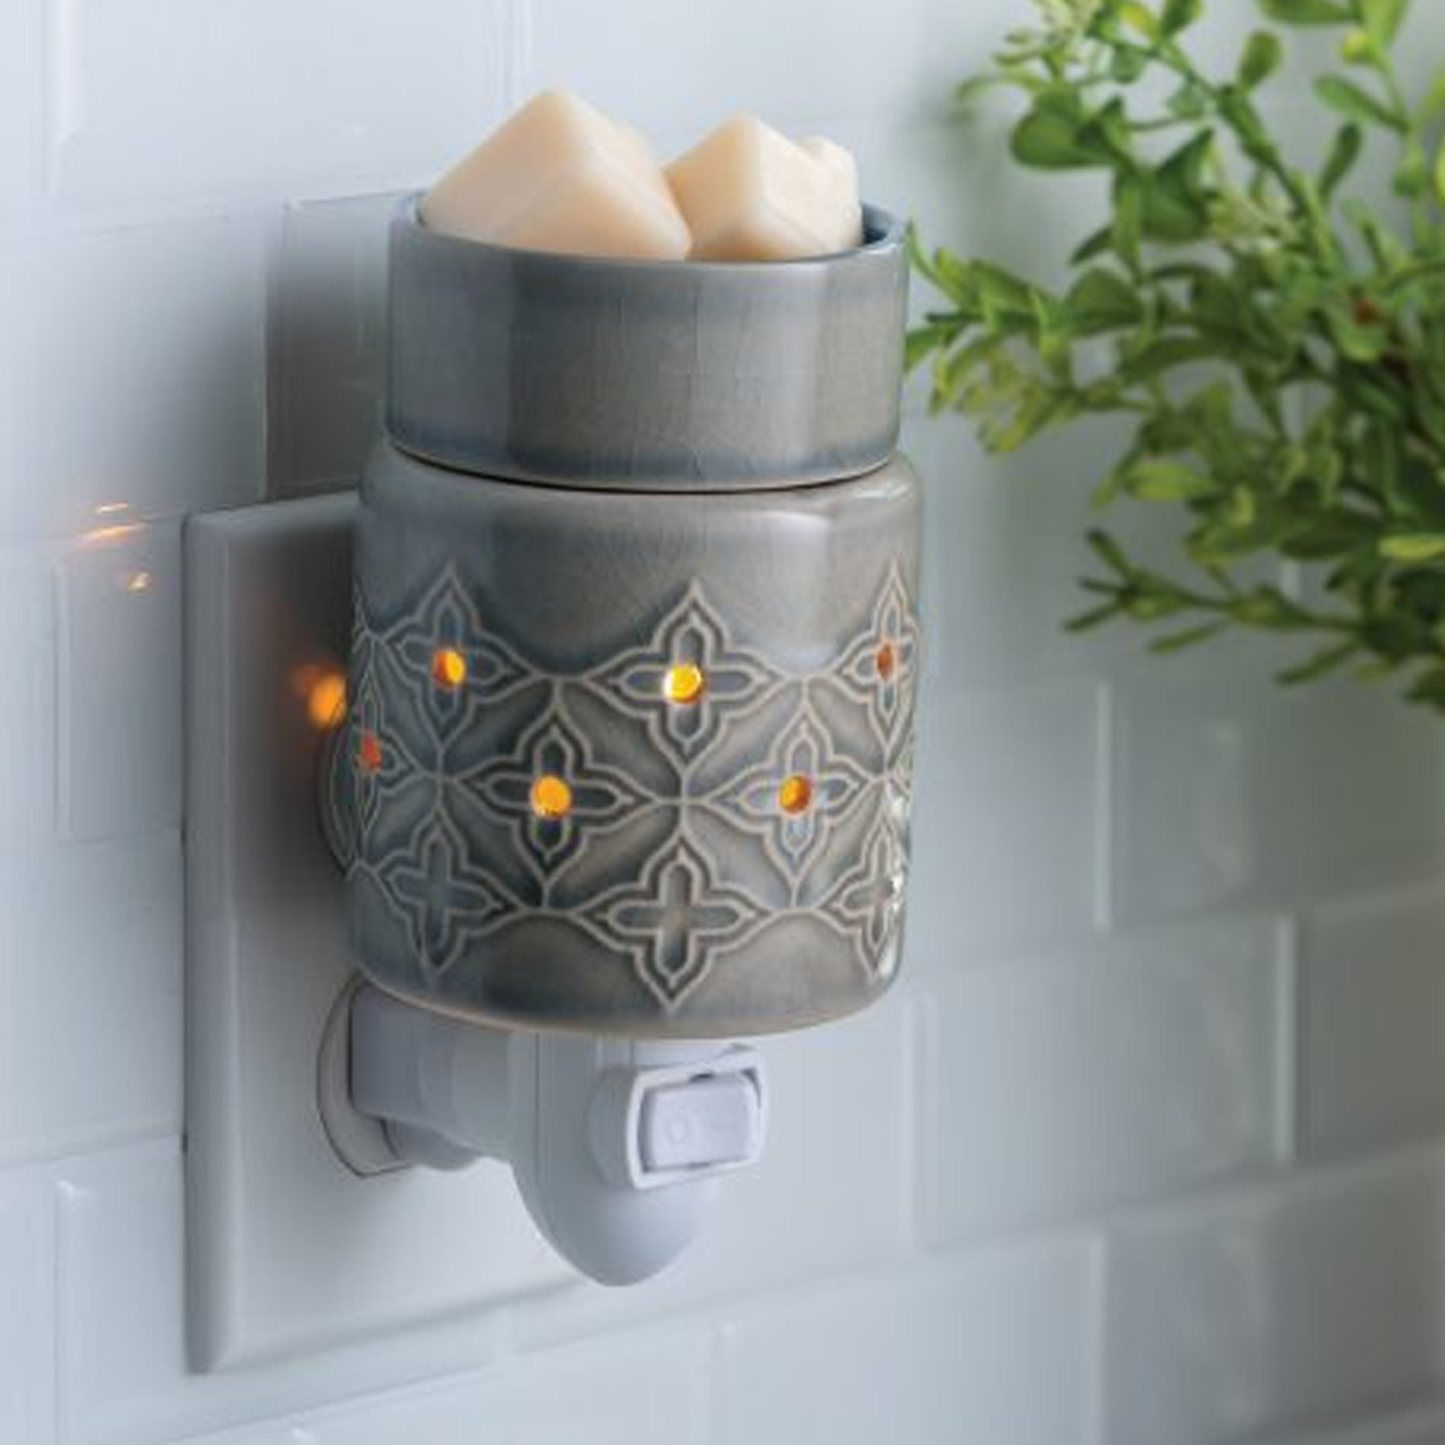 Jasmine: Plug in Fragrance and Wax Melt Warmer Plugged in to a Tiled Wall | Happy Piranha